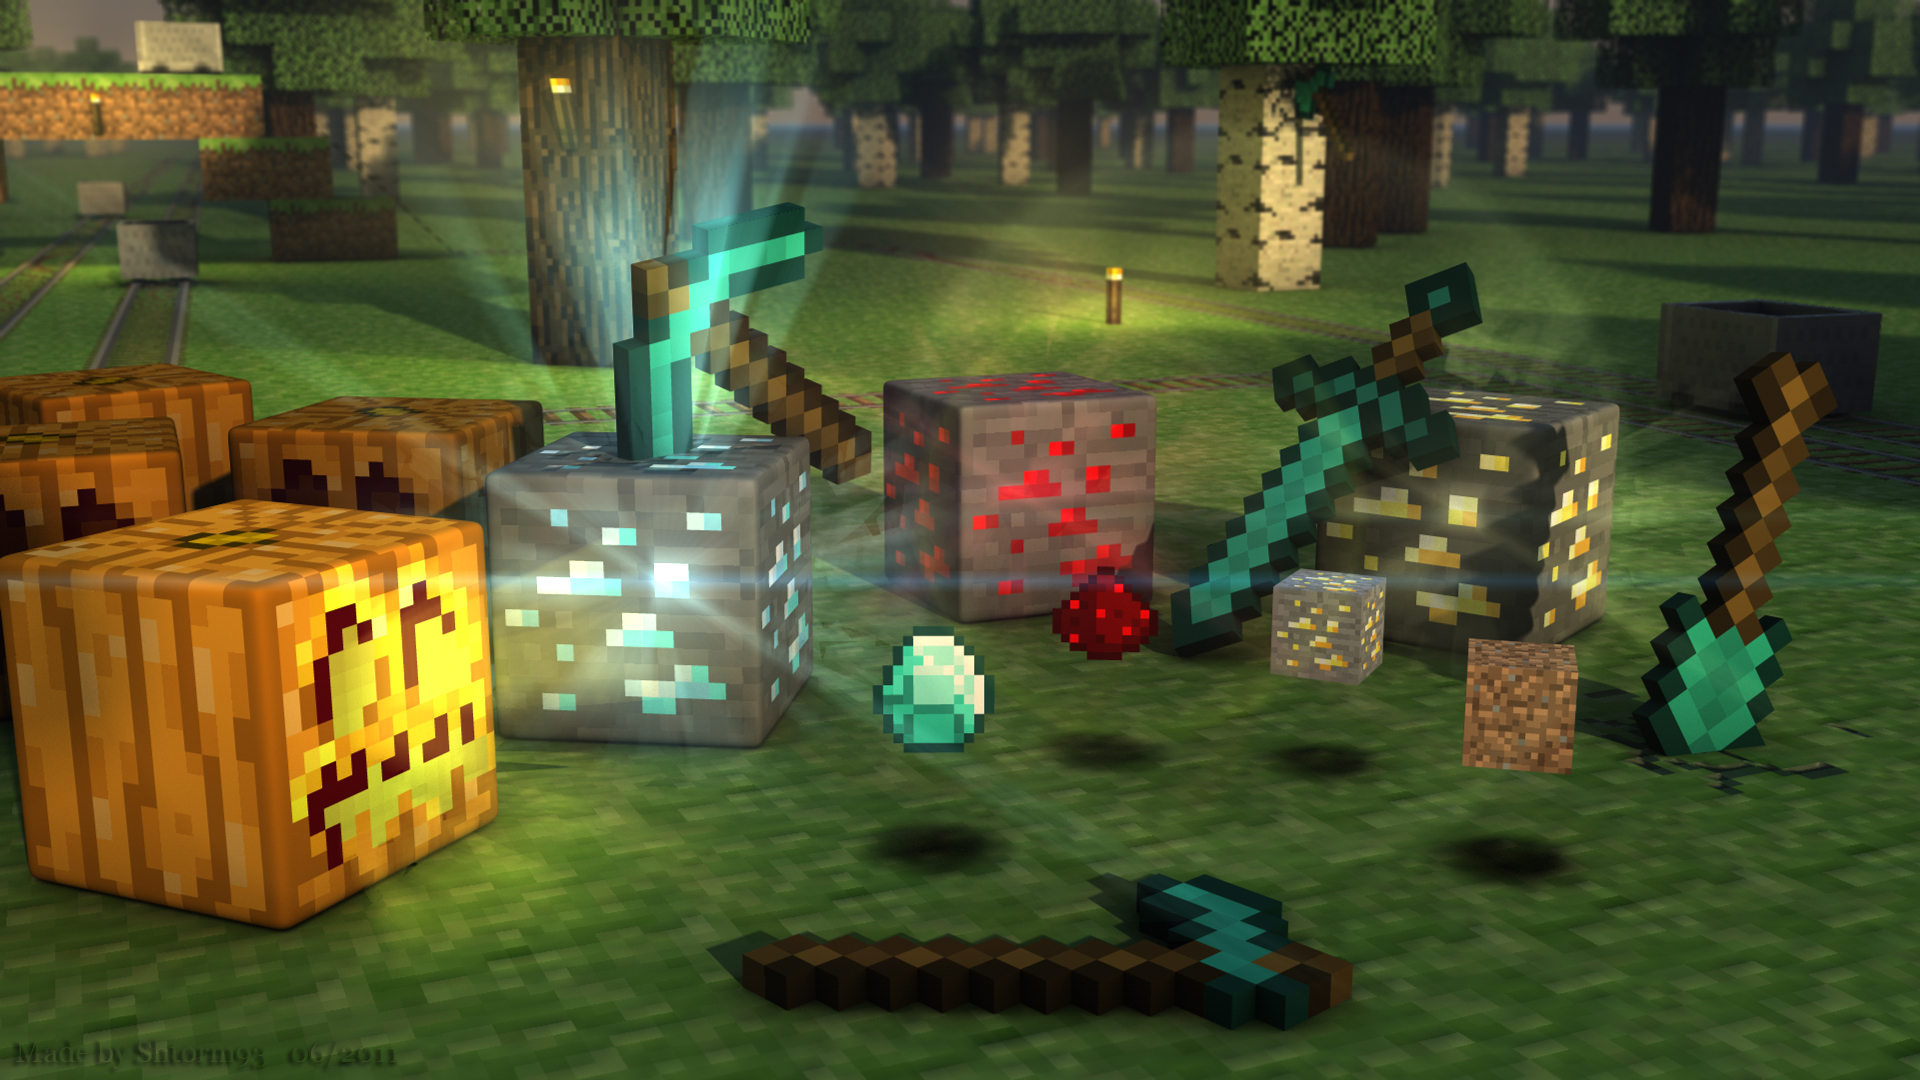 Wallpaper Details File Name Minecraft 1080p Uploaded By